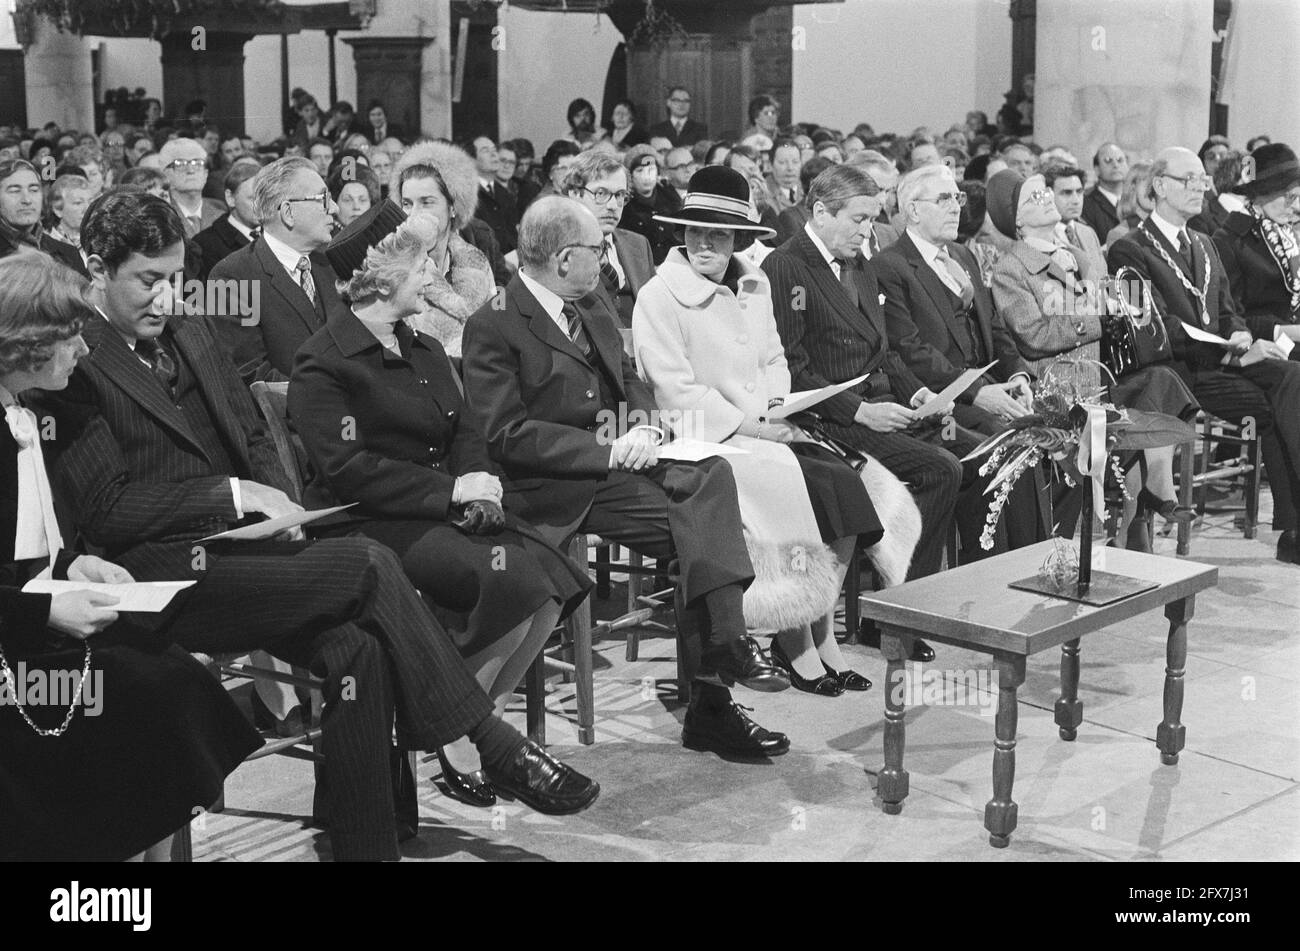 Princess Bearix and Prince Claus attend official opening of restored Grote Kerk in Naarden, November 30, 1978, Openings, churches, princes, princesses, restorations, The Netherlands, 20th century press agency photo, news to remember, documentary, historic photography 1945-1990, visual stories, human history of the Twentieth Century, capturing moments in time Stock Photo